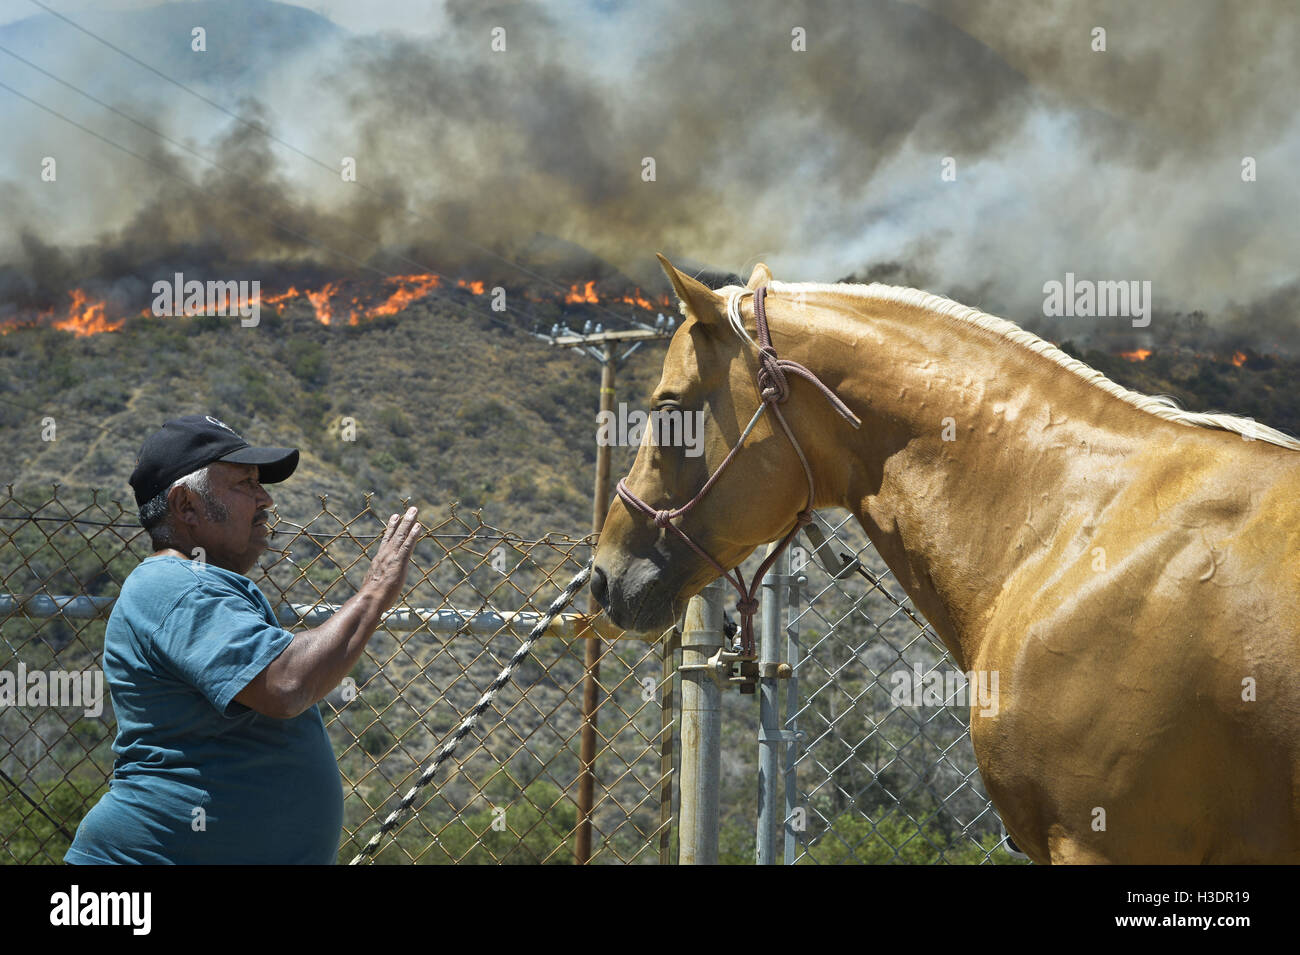 San Gabriel, CA, USA. 6th Oct, 2016. The Fish Fire burns in the Angeles National Forest on Monday, June 20th, 2016. The Fish Fire began amidst record triple digit temperatures and burned near homes north of the 210 Freeway. The Reservoir Fire started nearby, and both fires were managed as the San Gabriel Complex. In total the two fires burned 5,399 acres and over 1,000 homes were evacuated. © Stuart Palley/ZUMA Wire/Alamy Live News Stock Photo